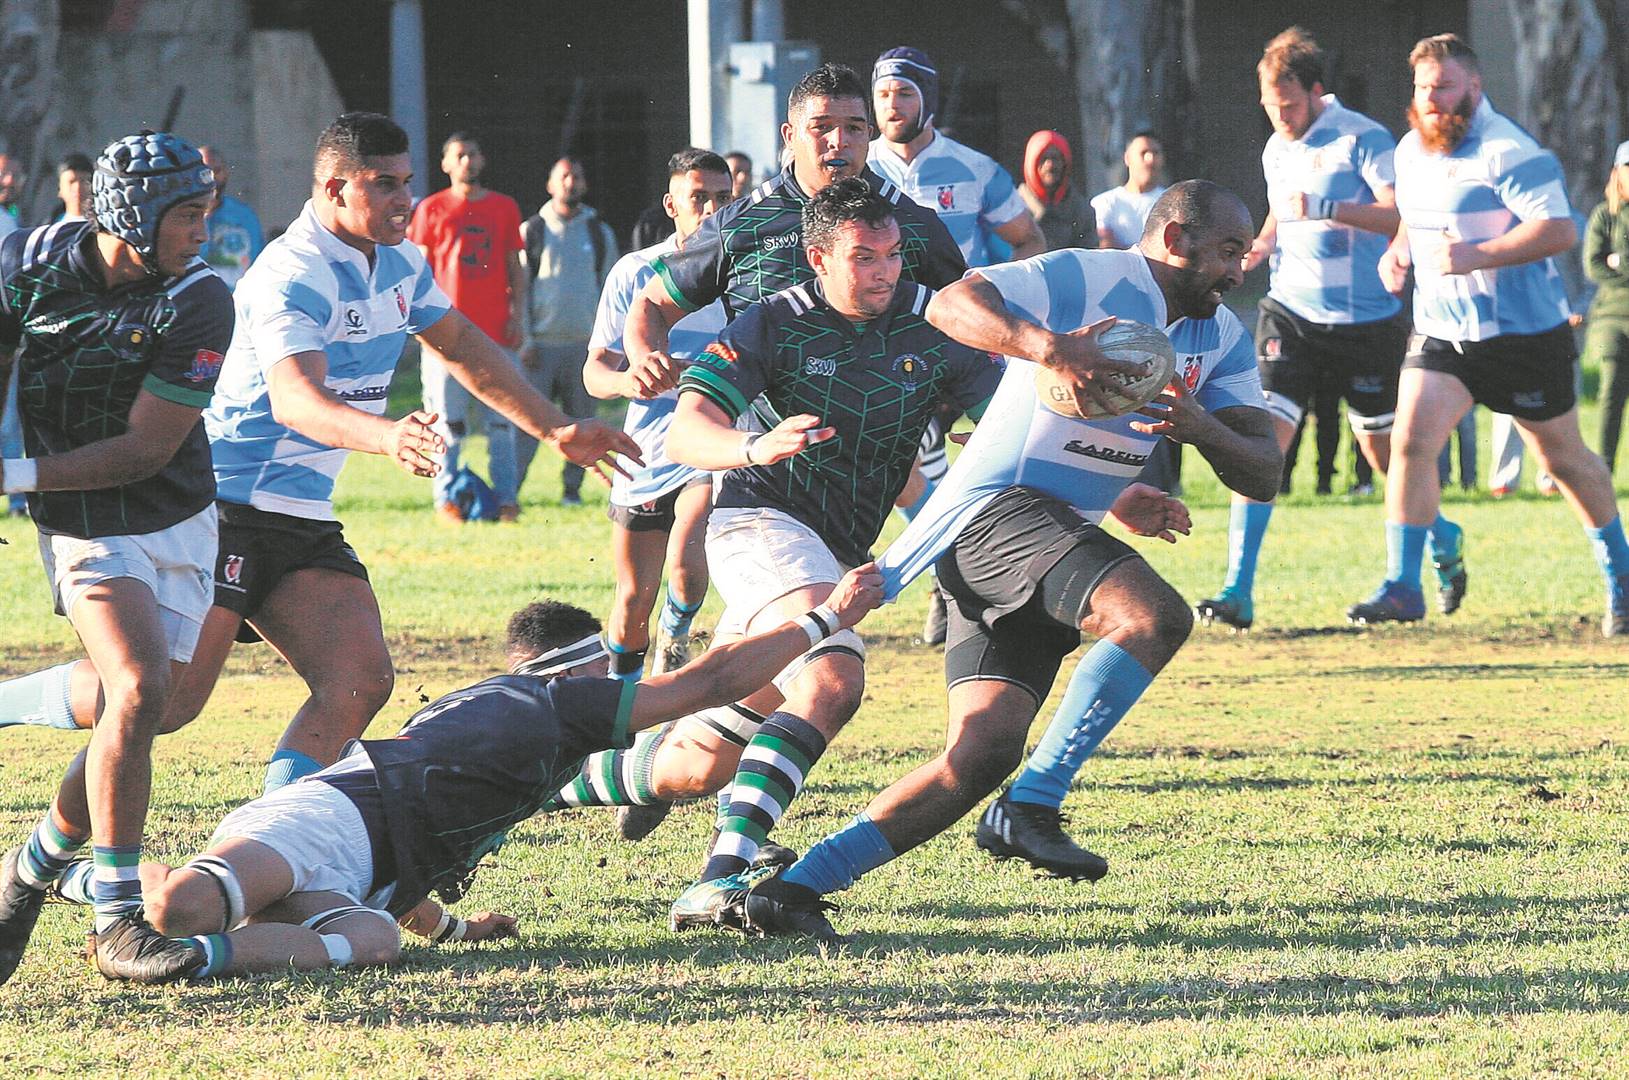 Cheslyn Roberts of Union-Milnerton cuts through the defence of SK Walmers with Muhammed Burns trying to stop his leg drive during a Western Province Rugby Union Super League A game played in Green Point on Saturday 25 June. Kloof is yet record a win for the season, with Uni-Mil forcing them deeper into the quagmire with a 33-3 drubbing.PHOTO: Rashied Isaacs